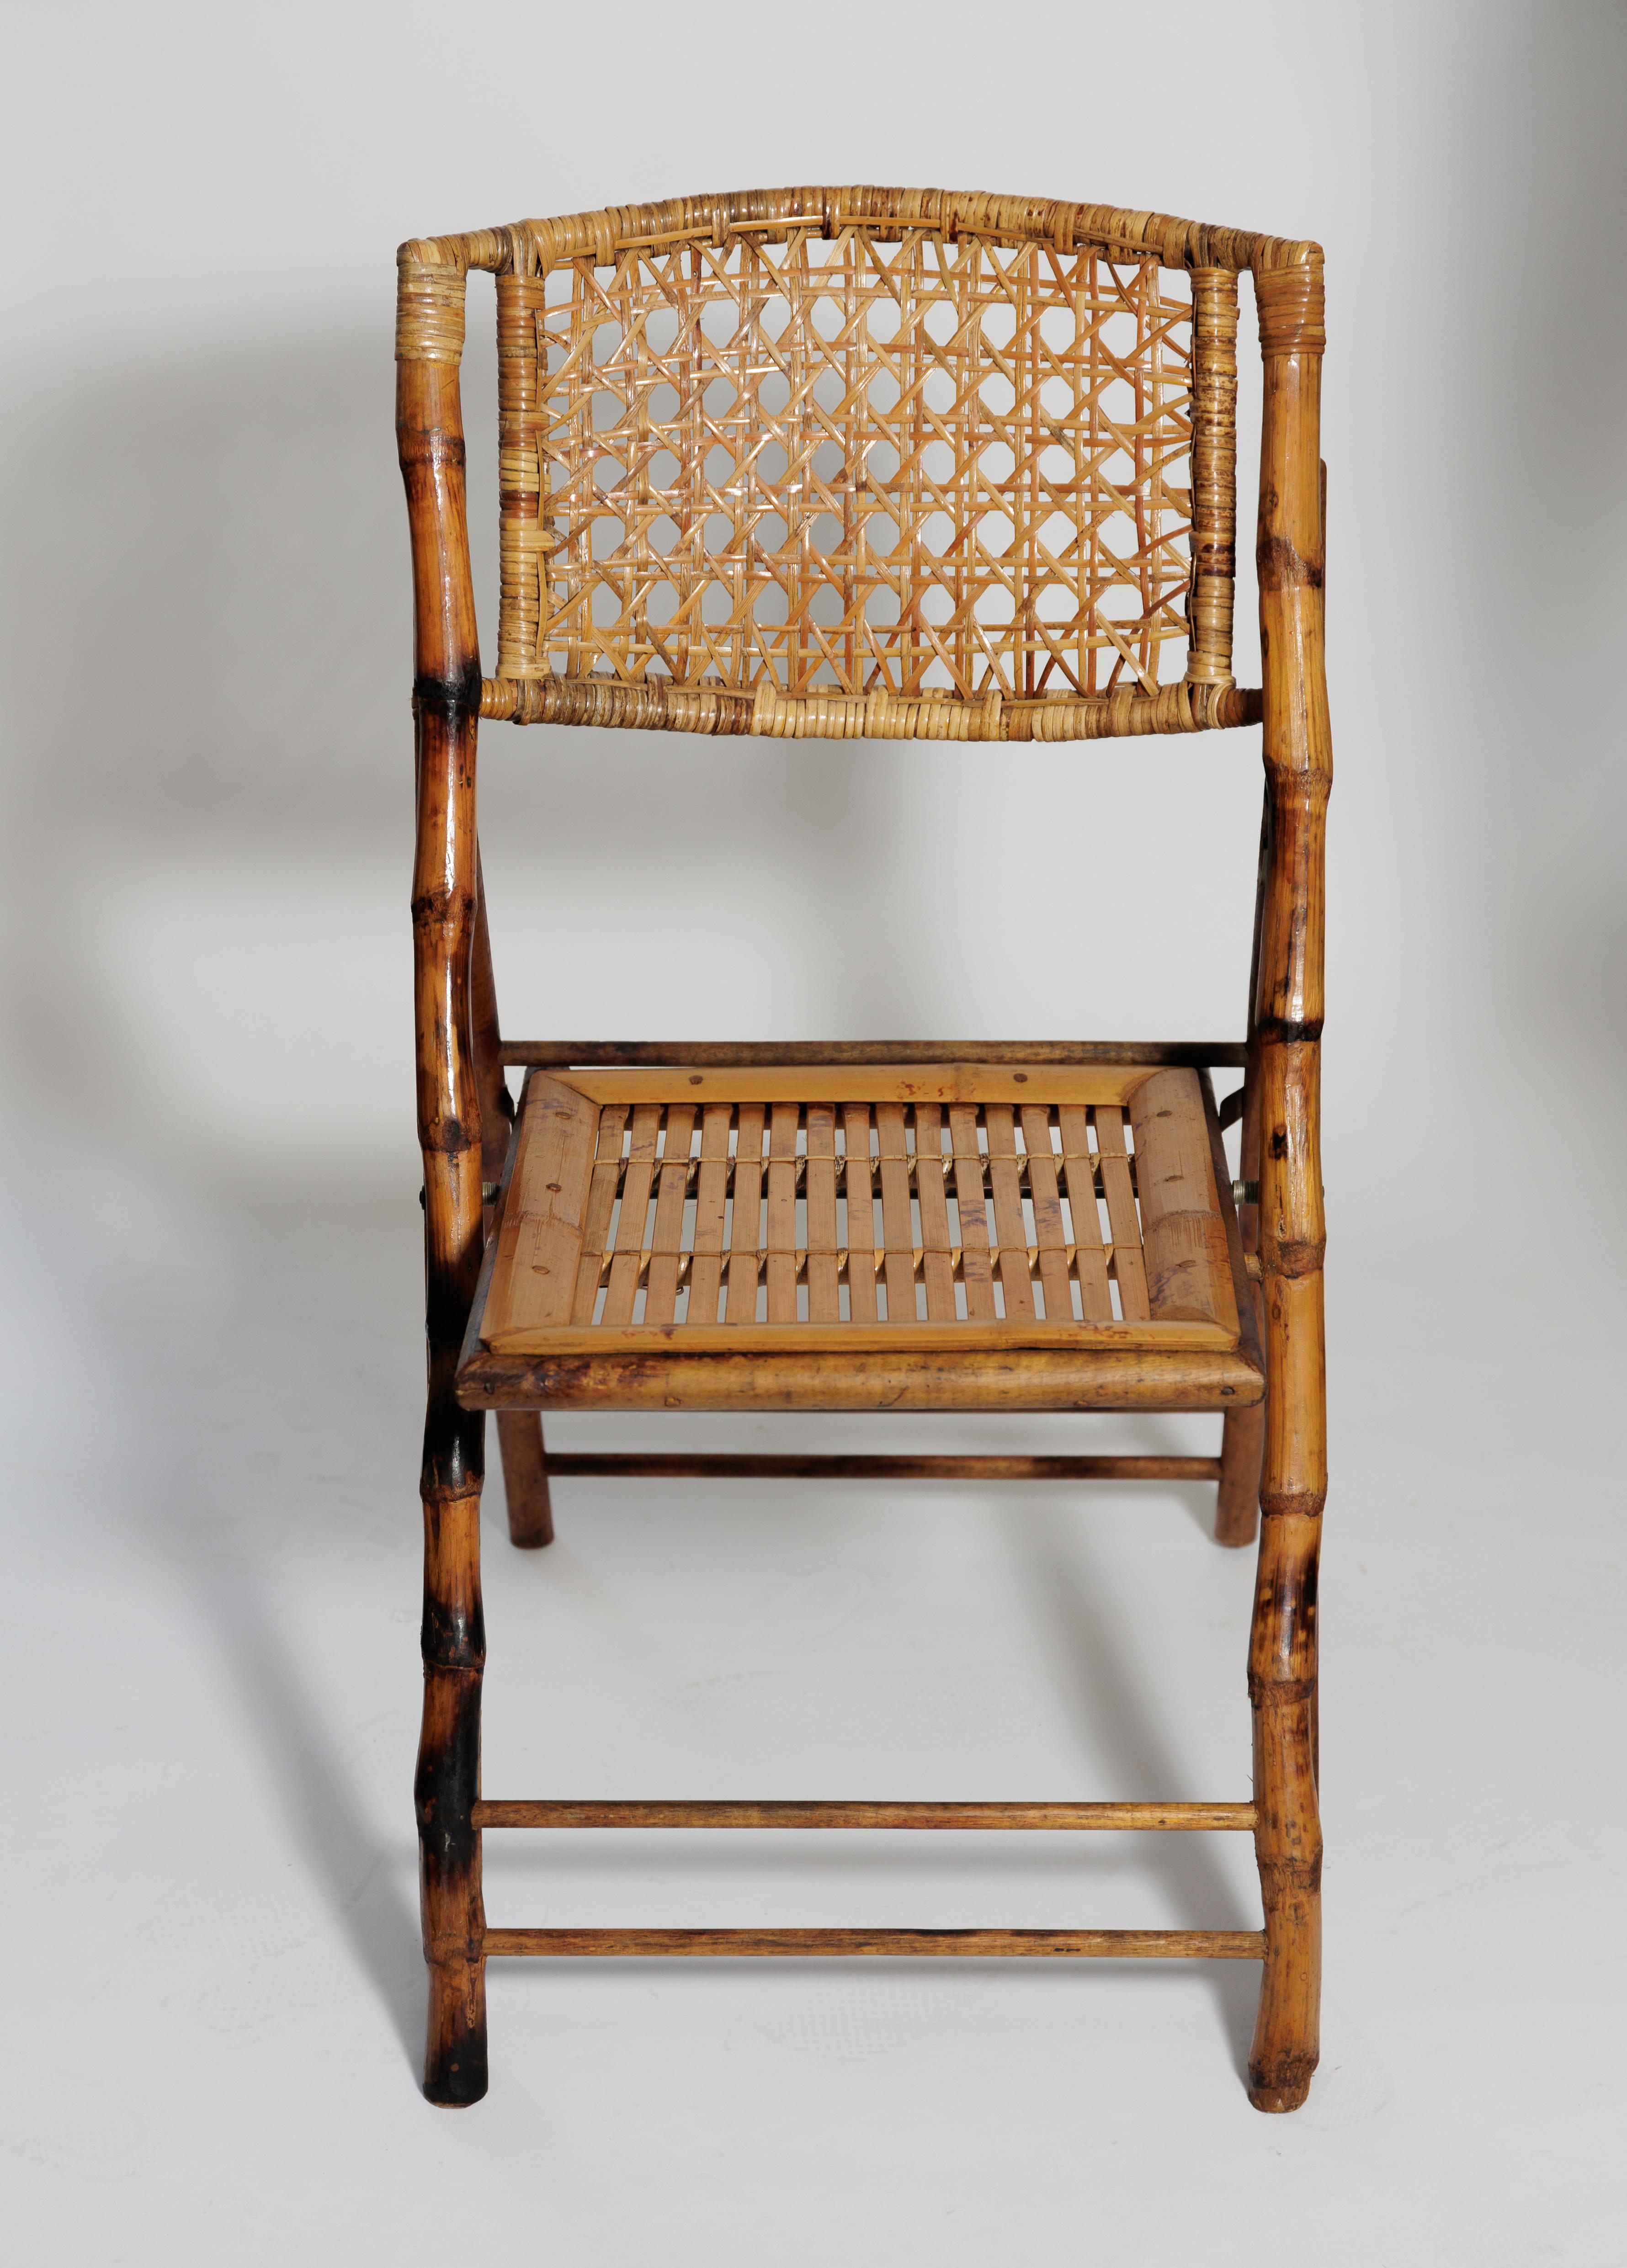 Set of six bamboo and woven wicker folding chairs whenever you need
extra seating.